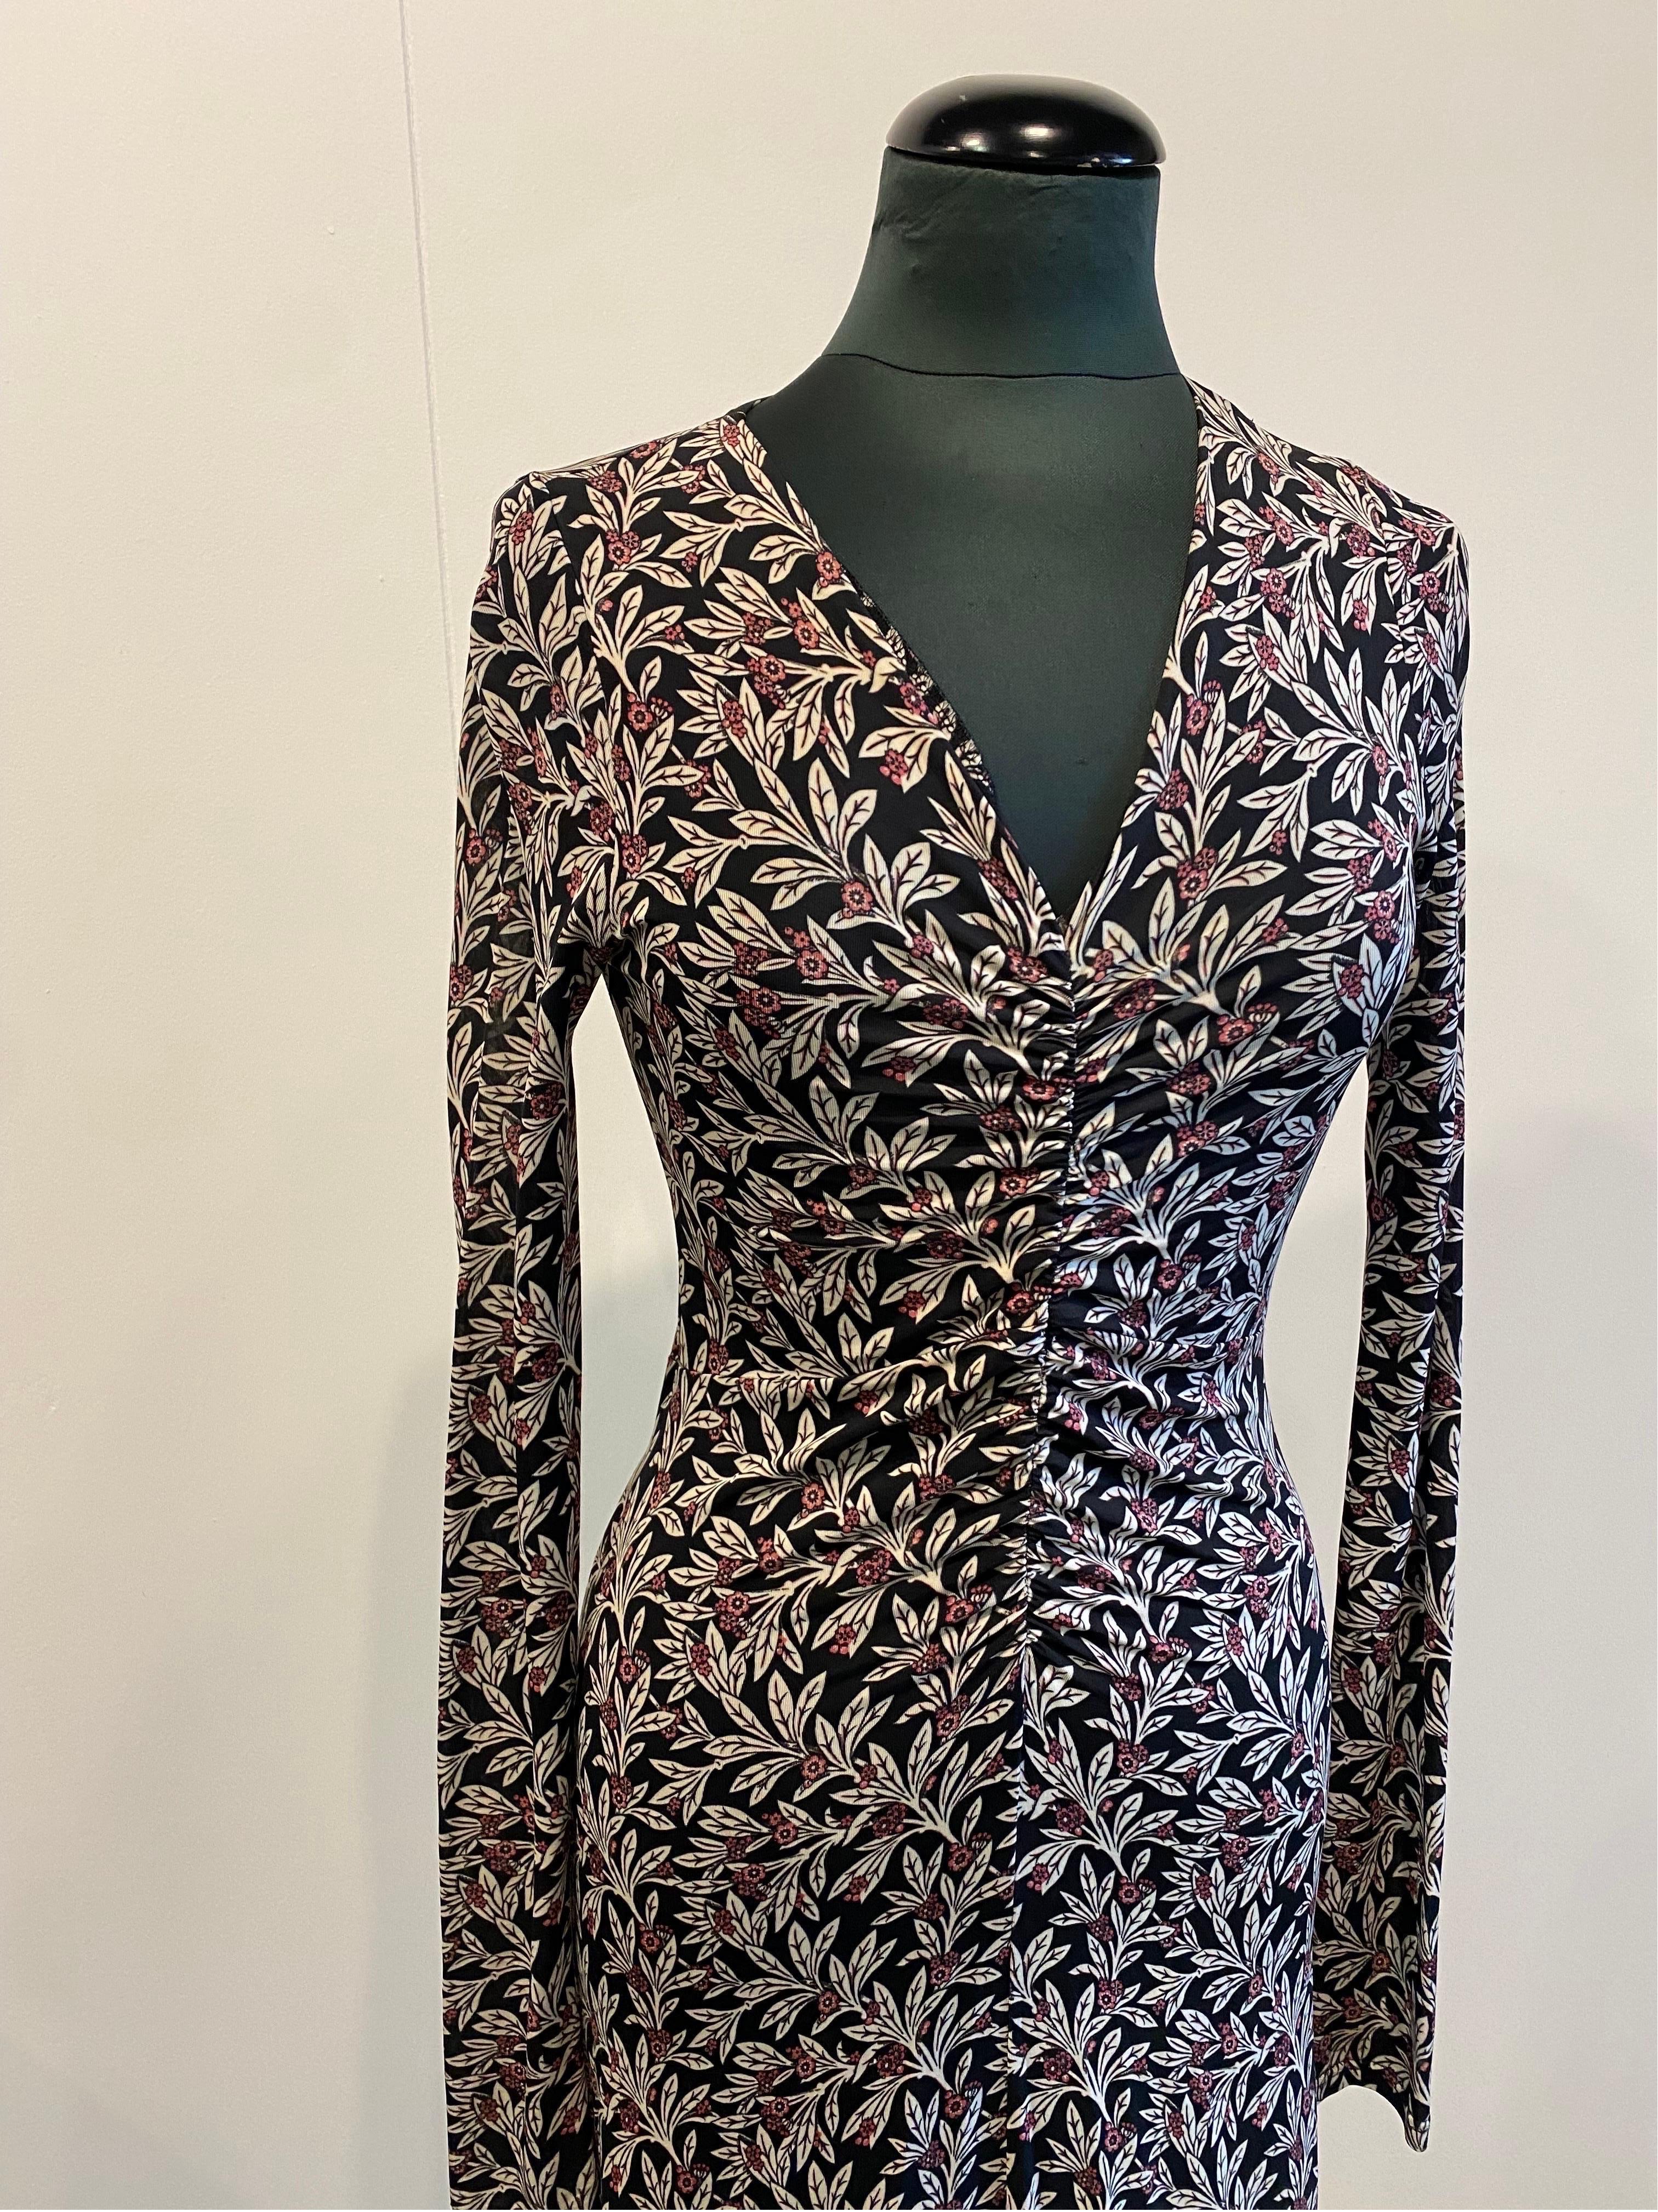 Isabel Marant Etoile long floral dress
Long and light dress Isabel Marant.
Central curl. V-neck.
Dark blue background with white and pink flowers.
It falls softly with a sewn edge on the bottom.
Size 36 French.
It is quite elastic.
Shoulder